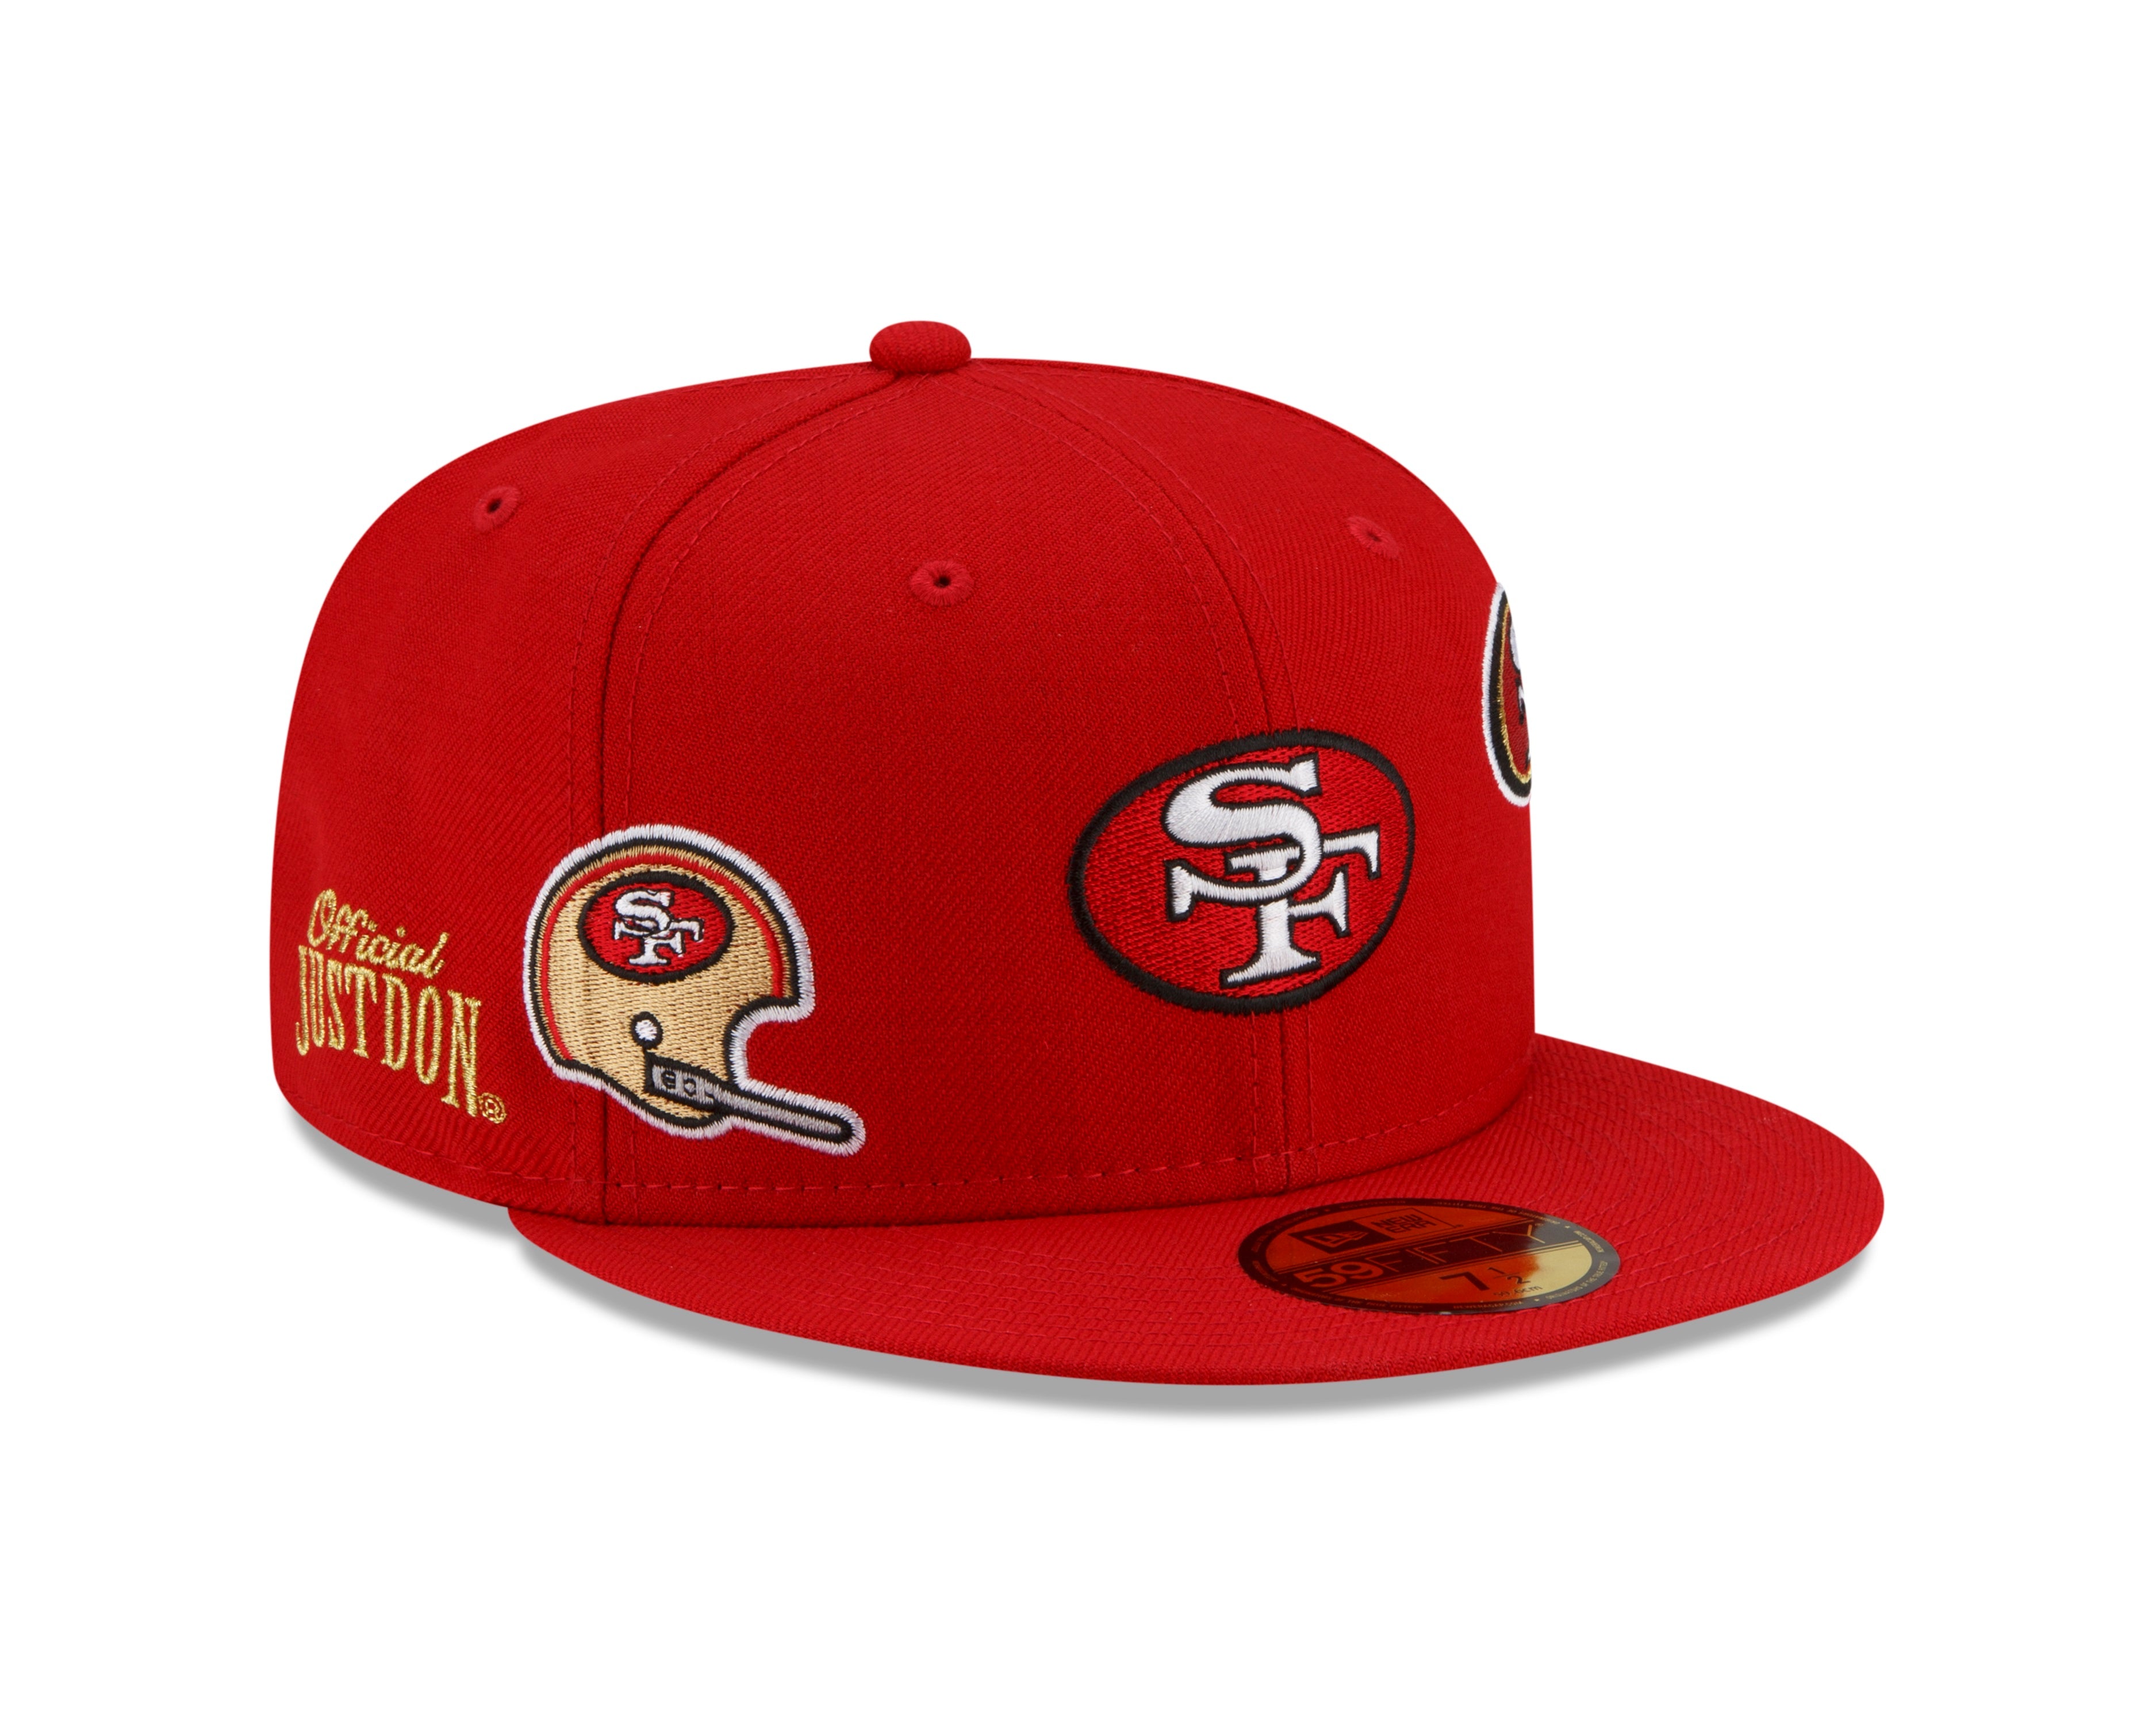 New York Giants 59FIFTY New Era Fitted Hat (Team Color Red Gray Under BRIM) - NY Giants New Era 5950 Fitteds - NFL Grey Bottom Giants New Era Caps 7